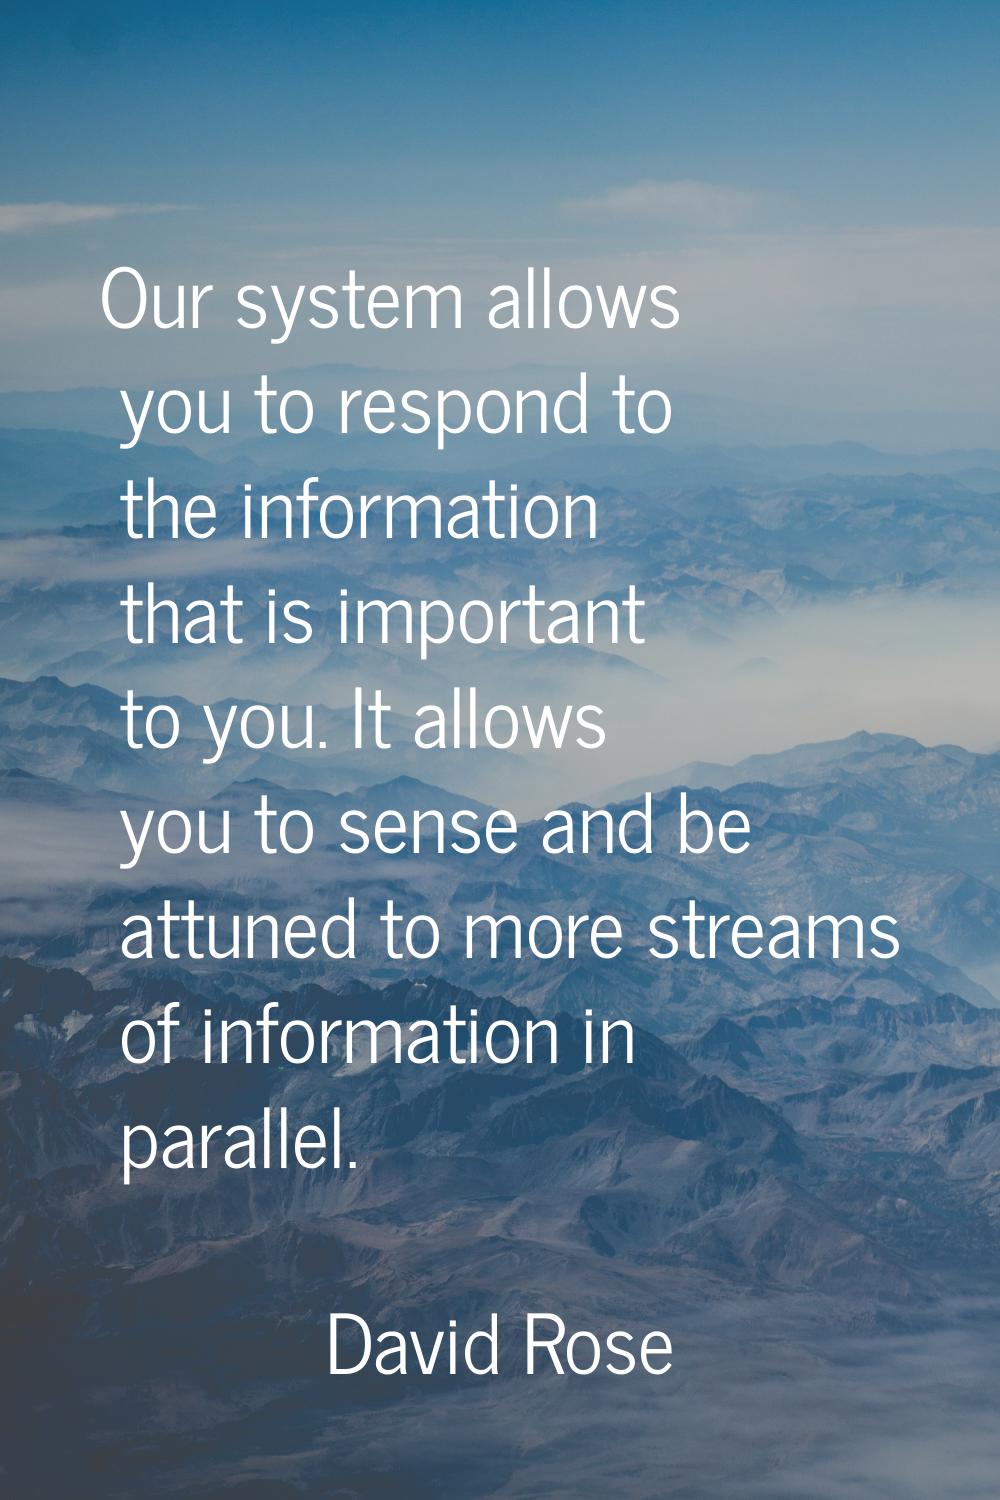 Our system allows you to respond to the information that is important to you. It allows you to sens